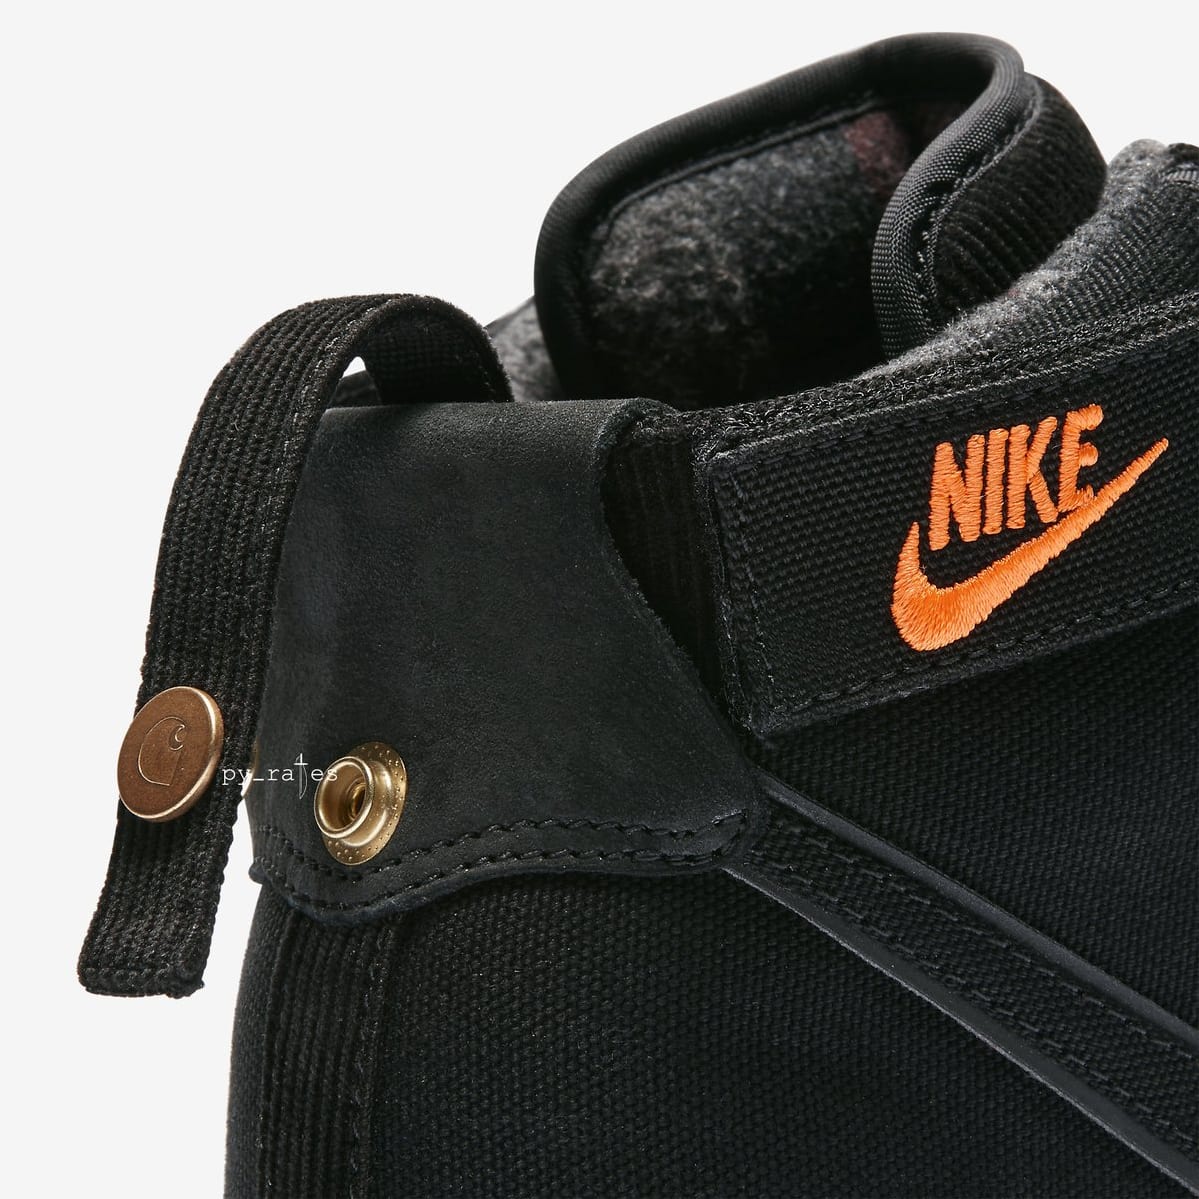 Rumored Release Date for the Carhartt WIP x Nike Collaboration